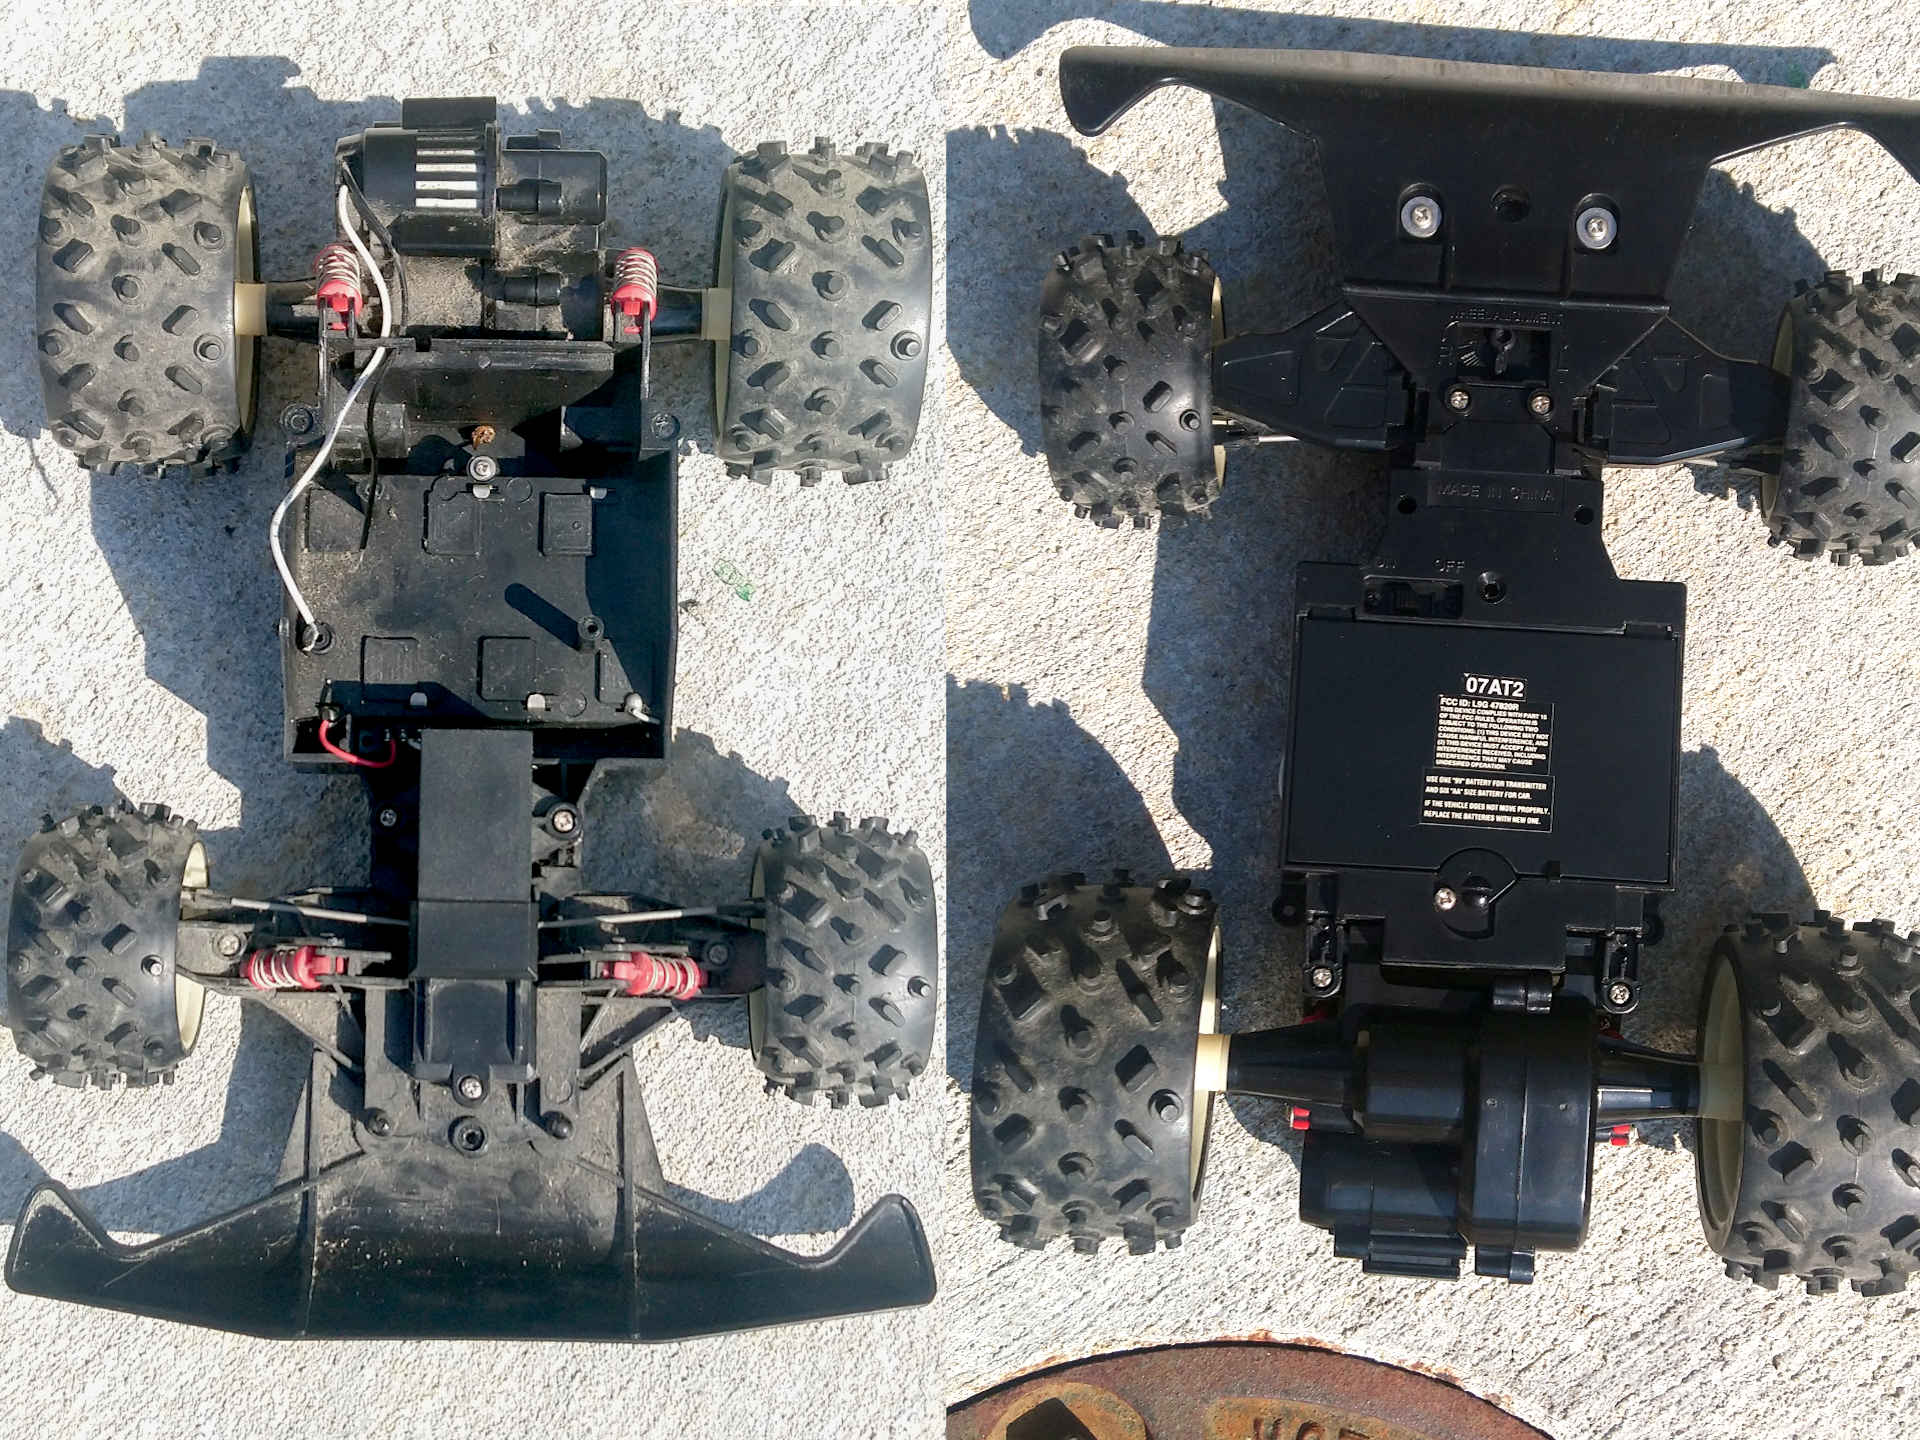 Top and bottom of chassis with electronics removed